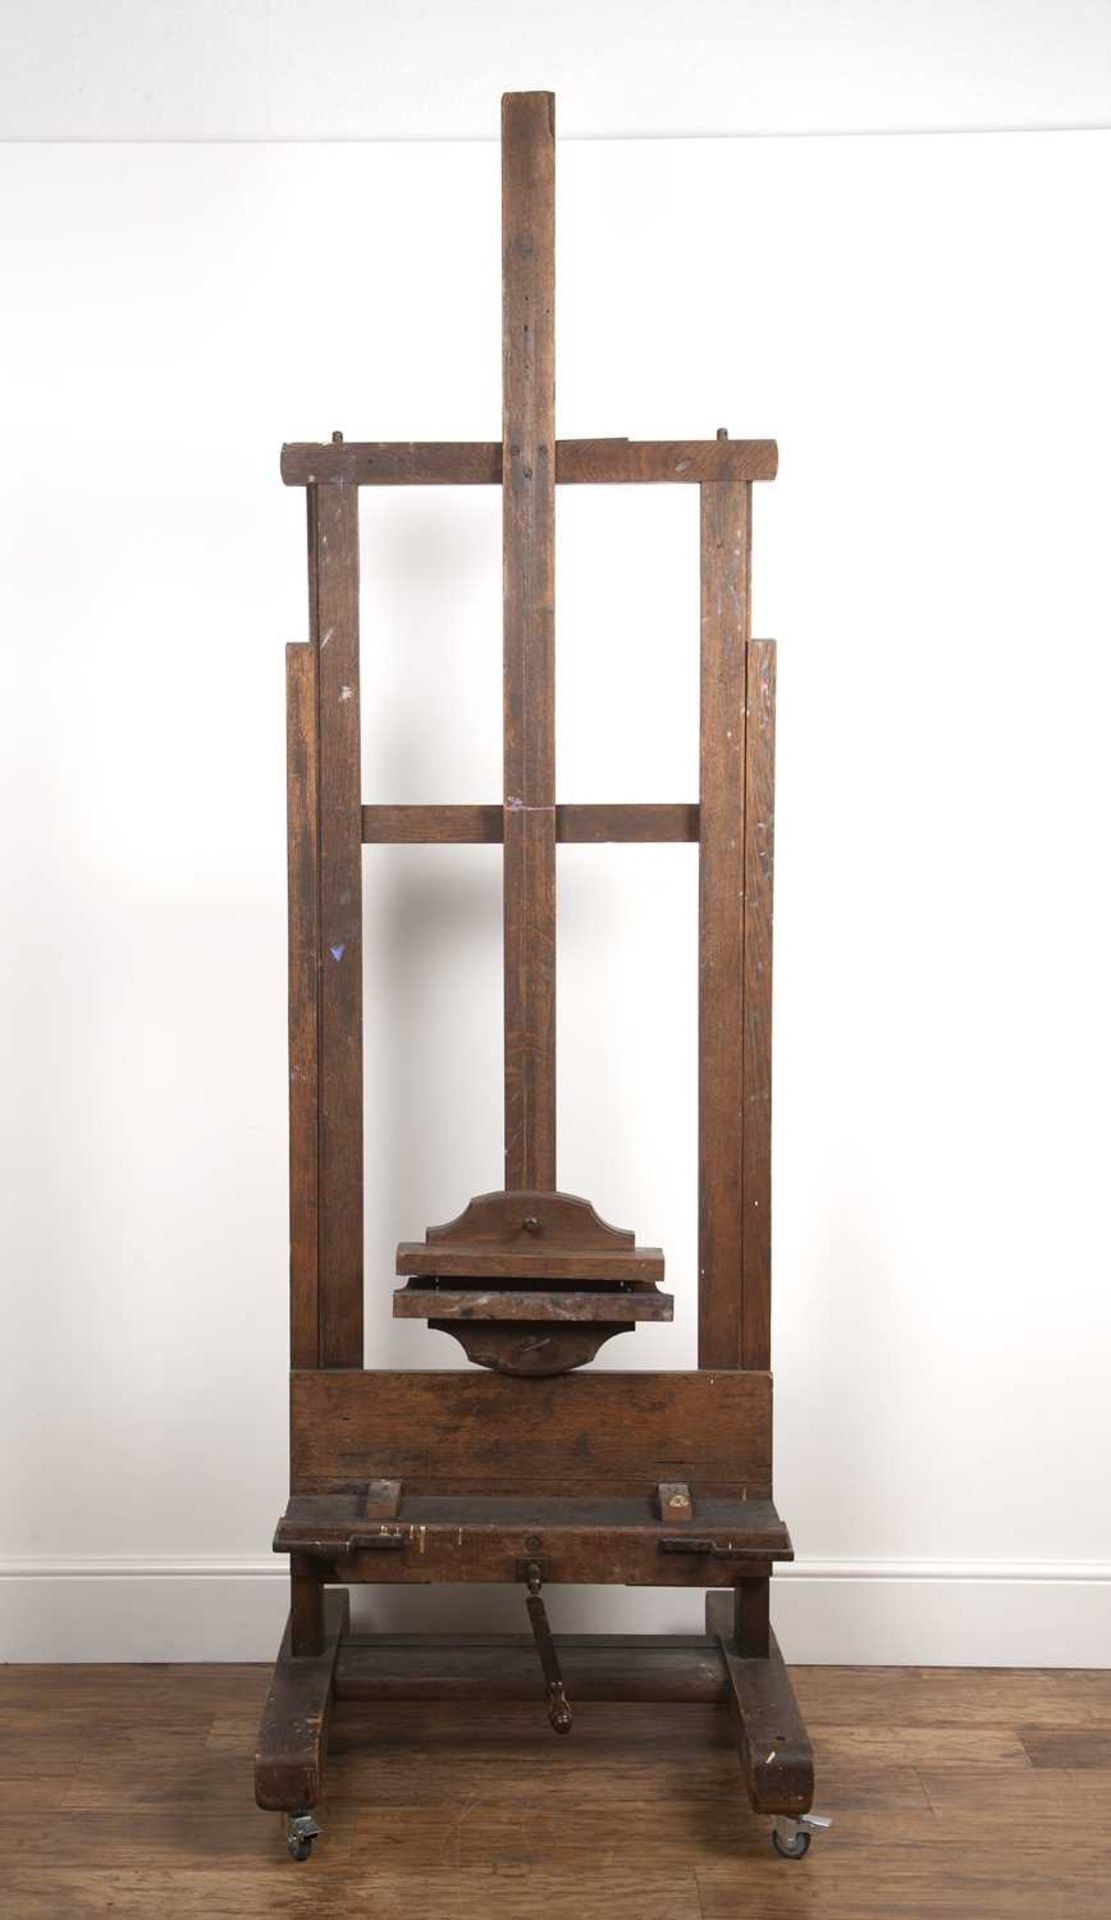 Robertson & Co. Ltd, London artist's Gallery easel 19th Century, with adjustable mechanism, brass - Image 2 of 4